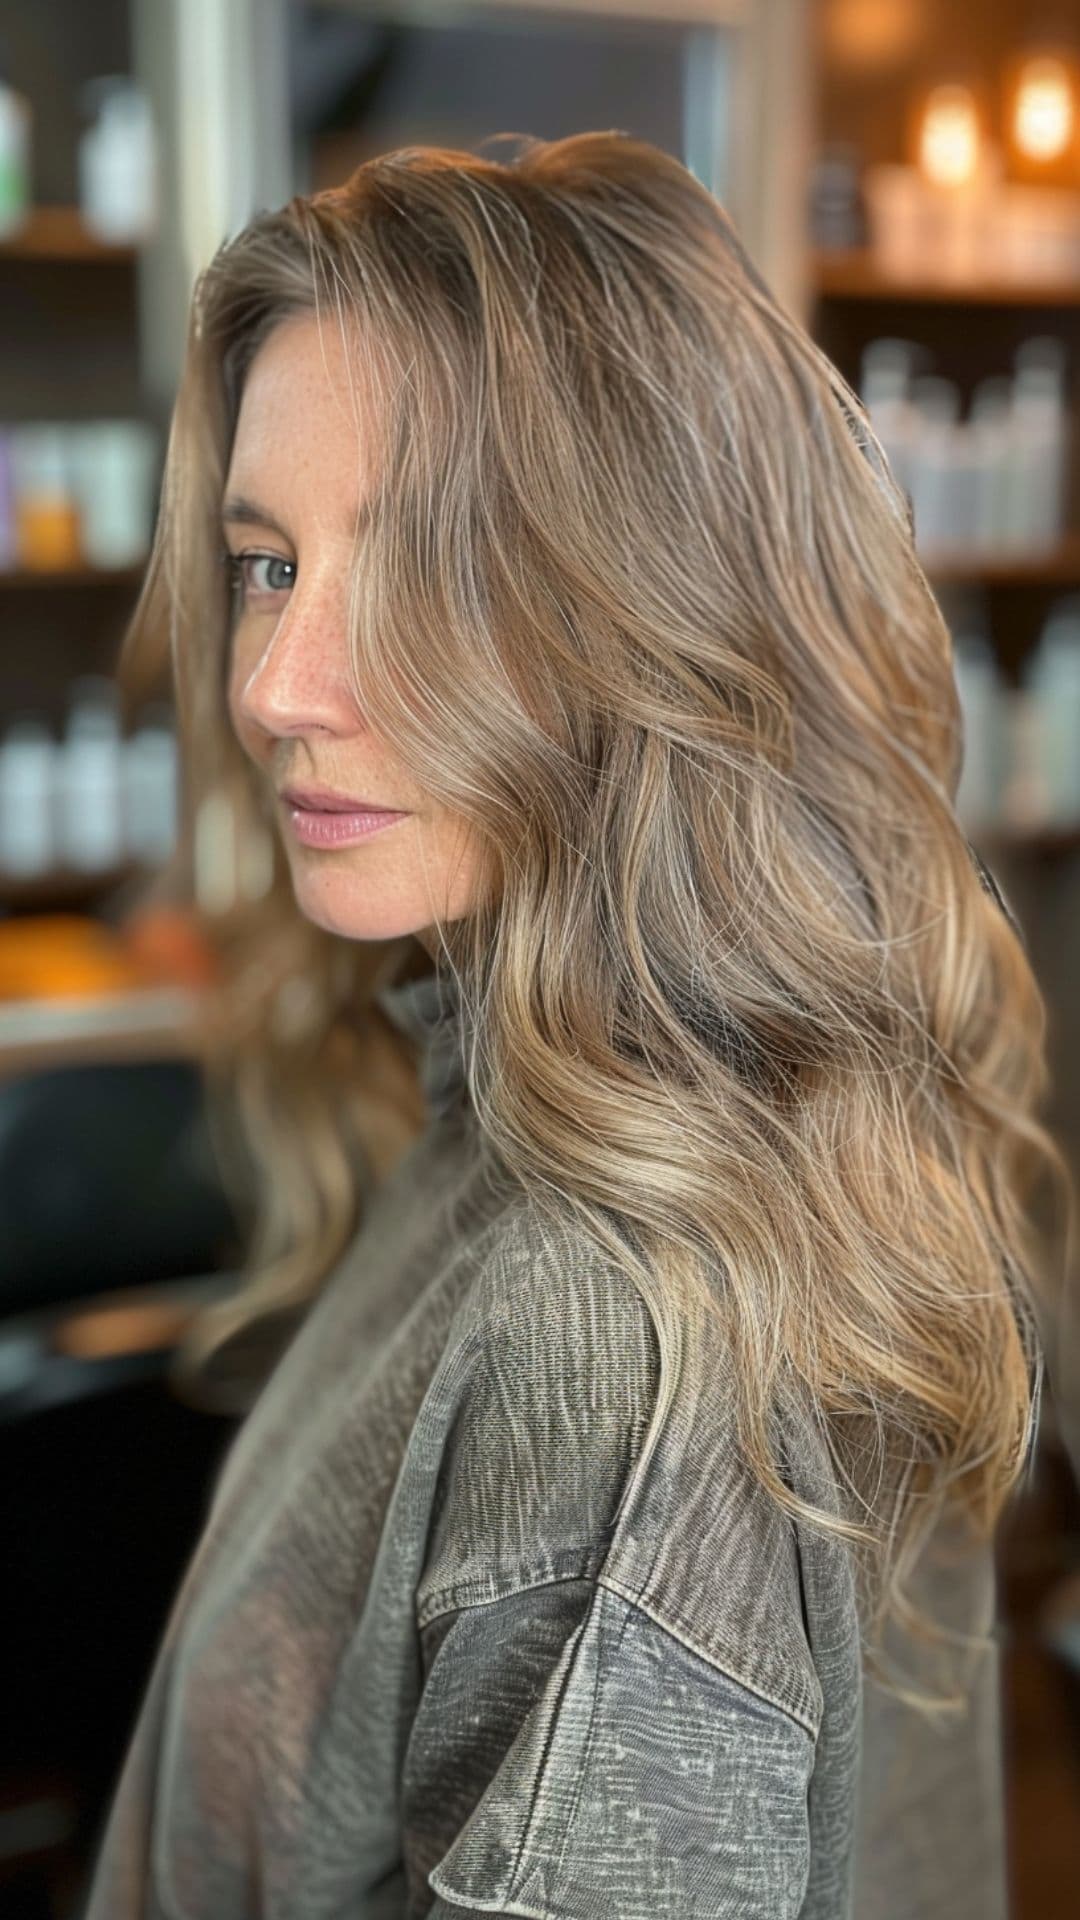 A woman modelling a loose boho waves hairstyle.